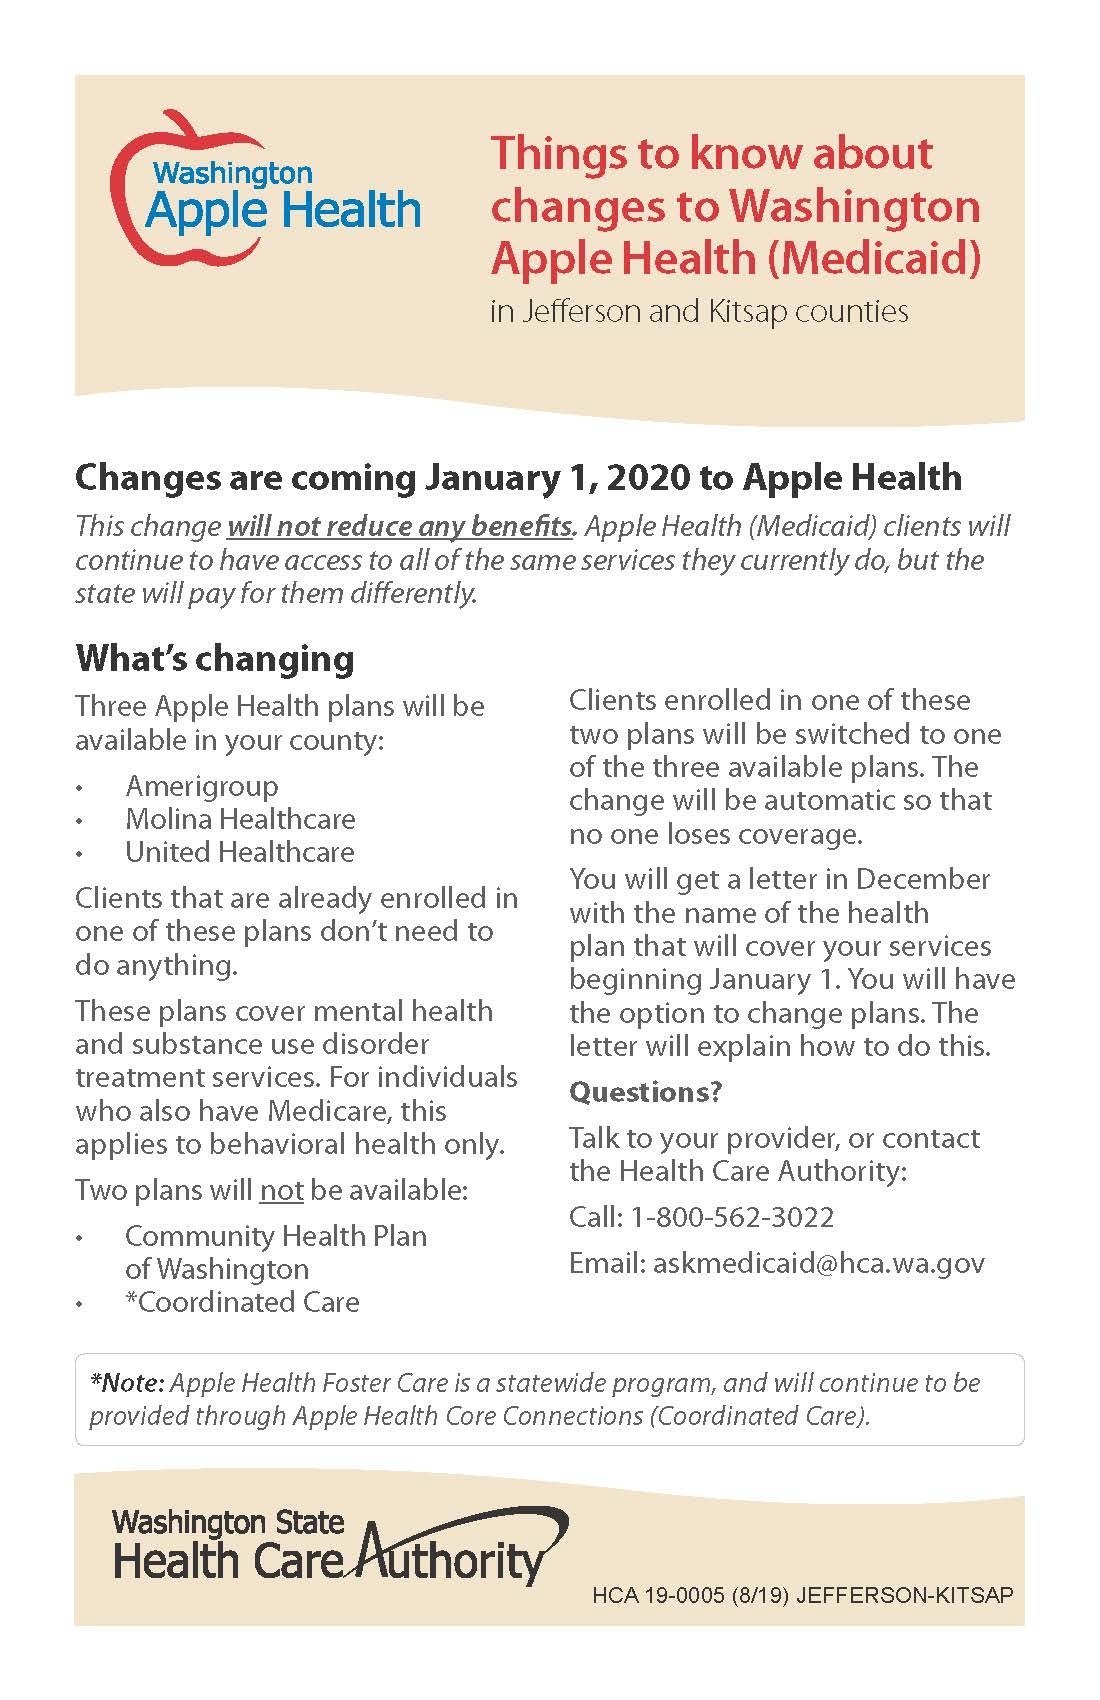 Changes to Washington's Apple Health (Medicaid) coming in 2020